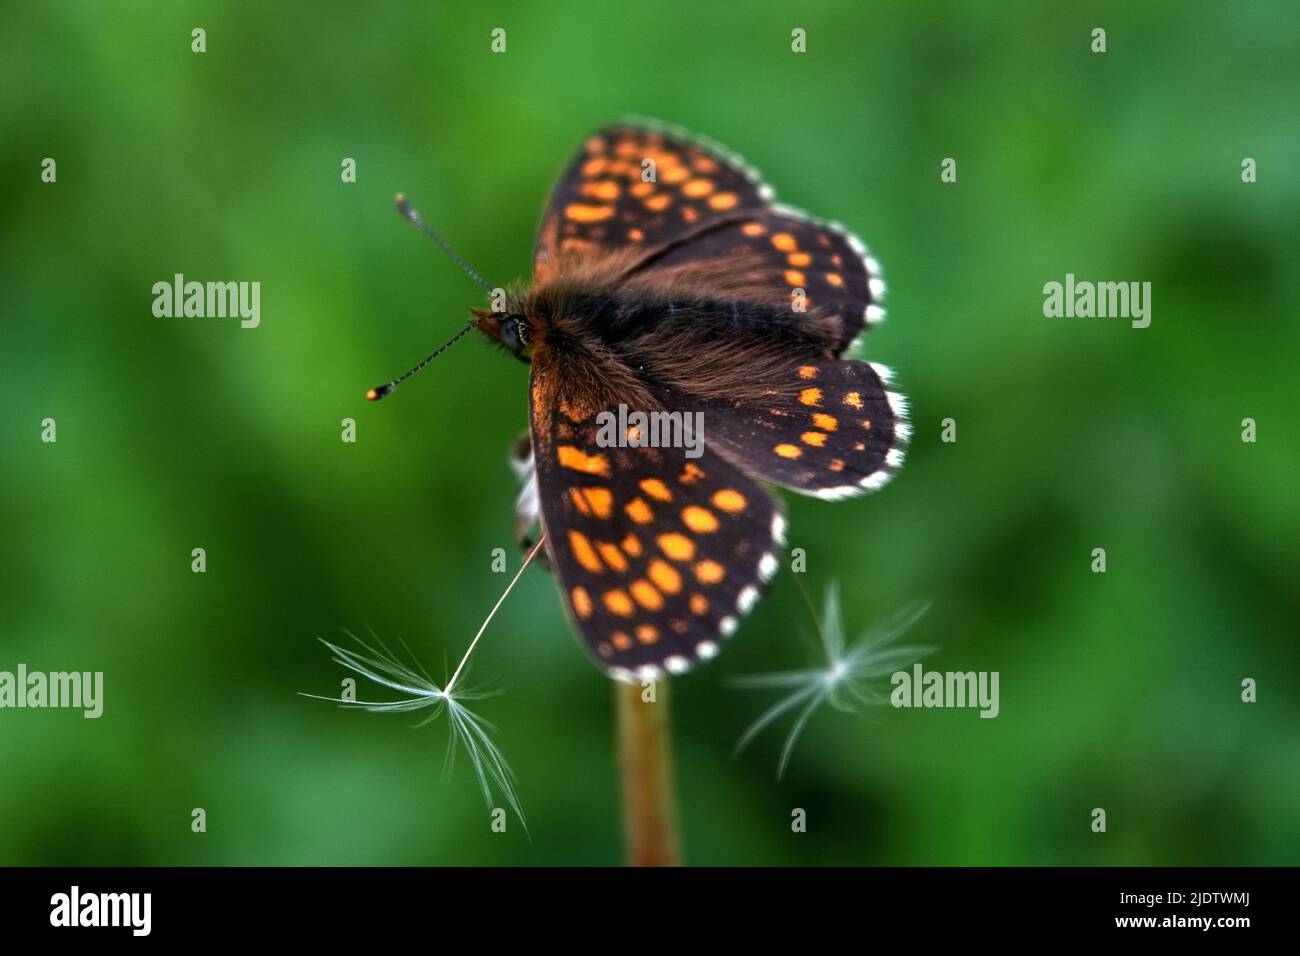 Northern Brown Argus butterfly, Latin name Plebeius artaxerxes on a green leaf close-up. Stock Photo